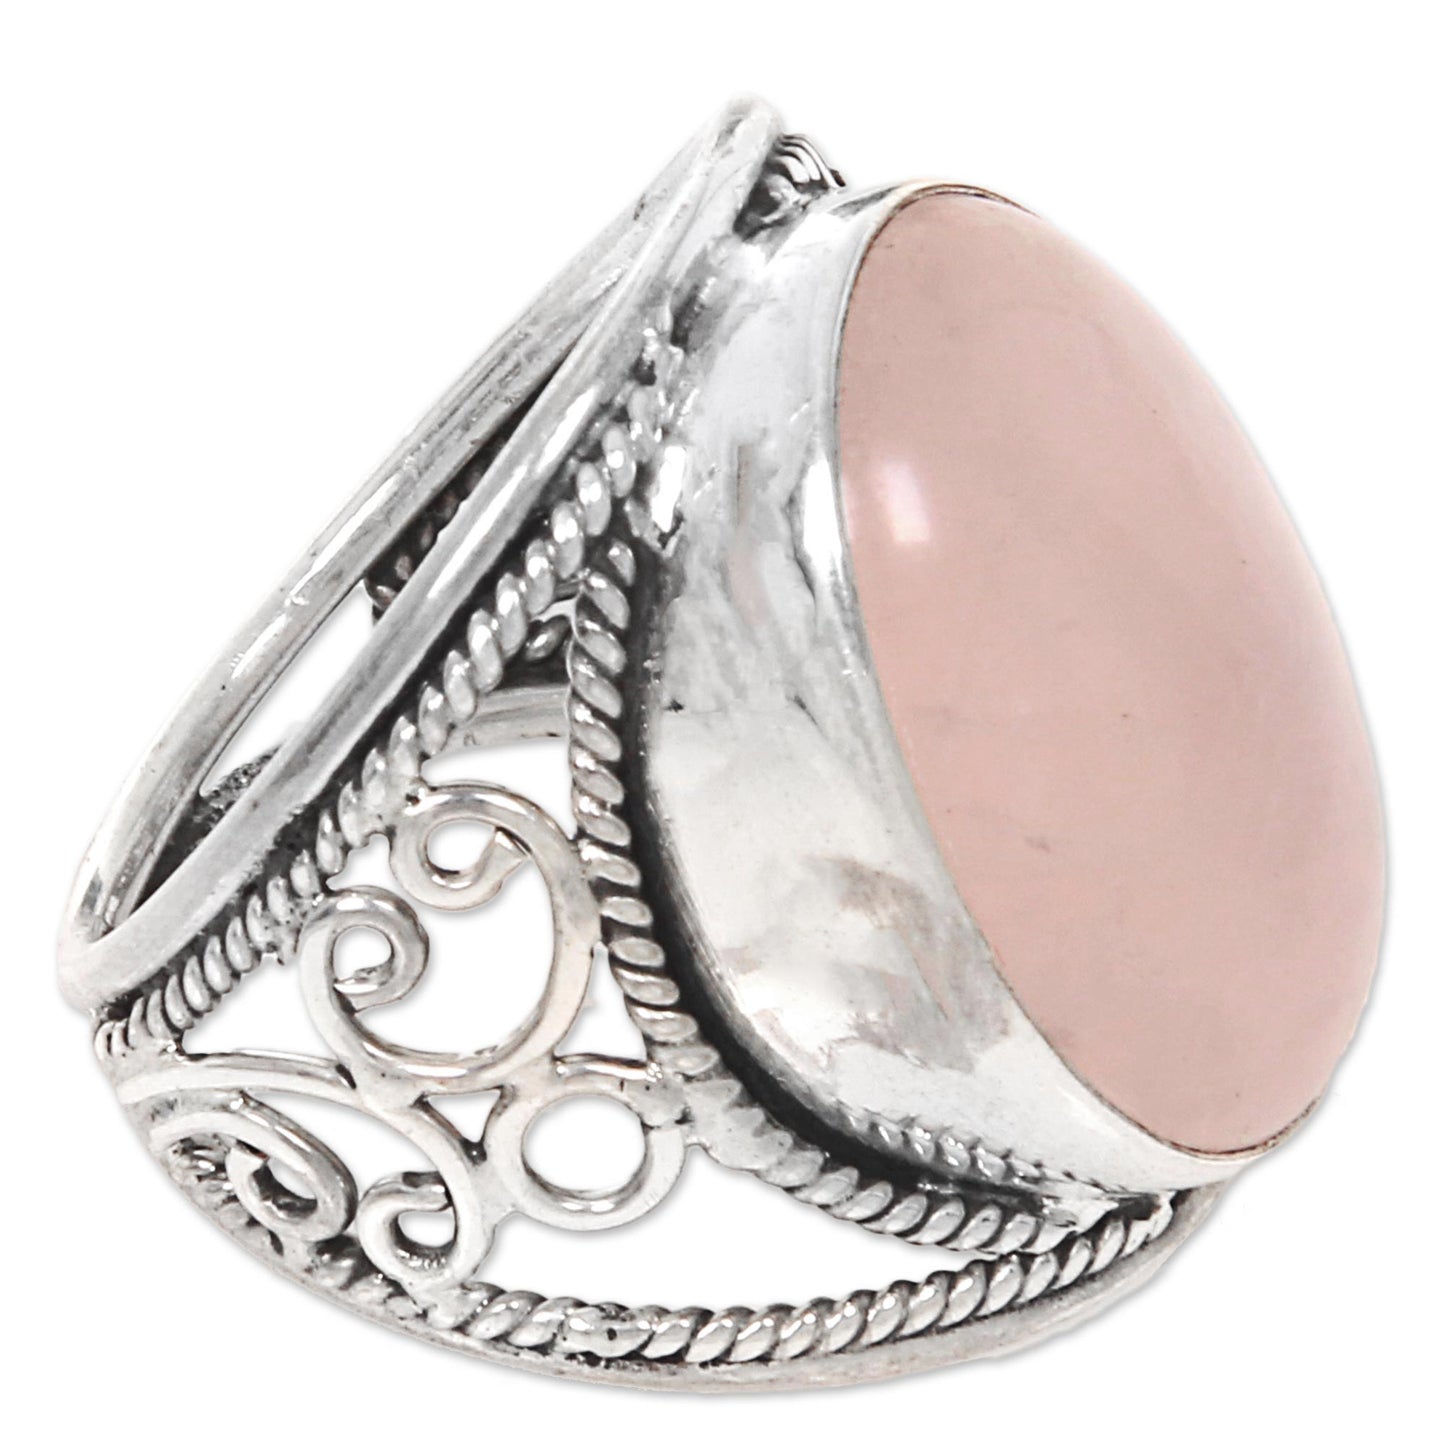 Pink Moon Hand Crafted Sterling Silver Ring from Indonesia